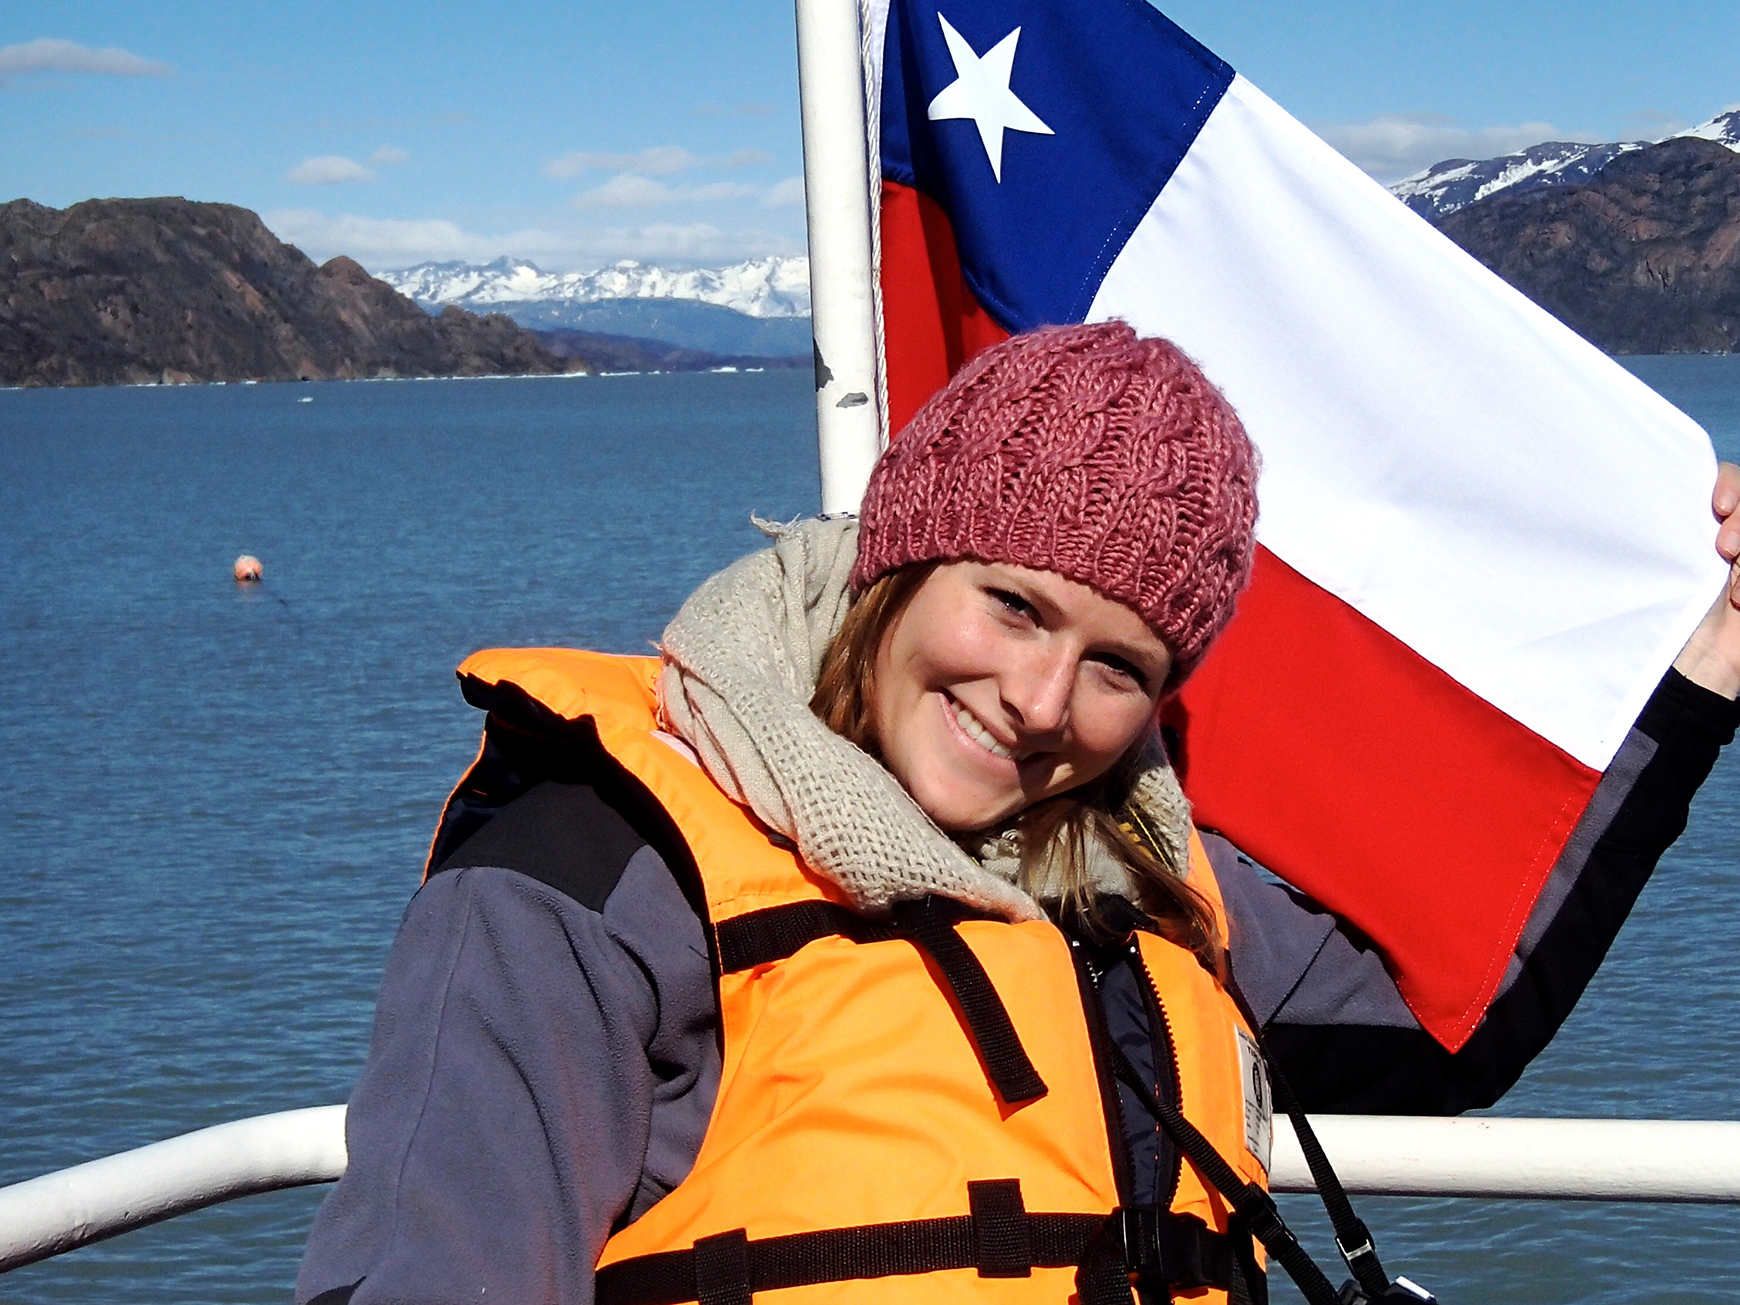 Study abroad in Chile with IFSA